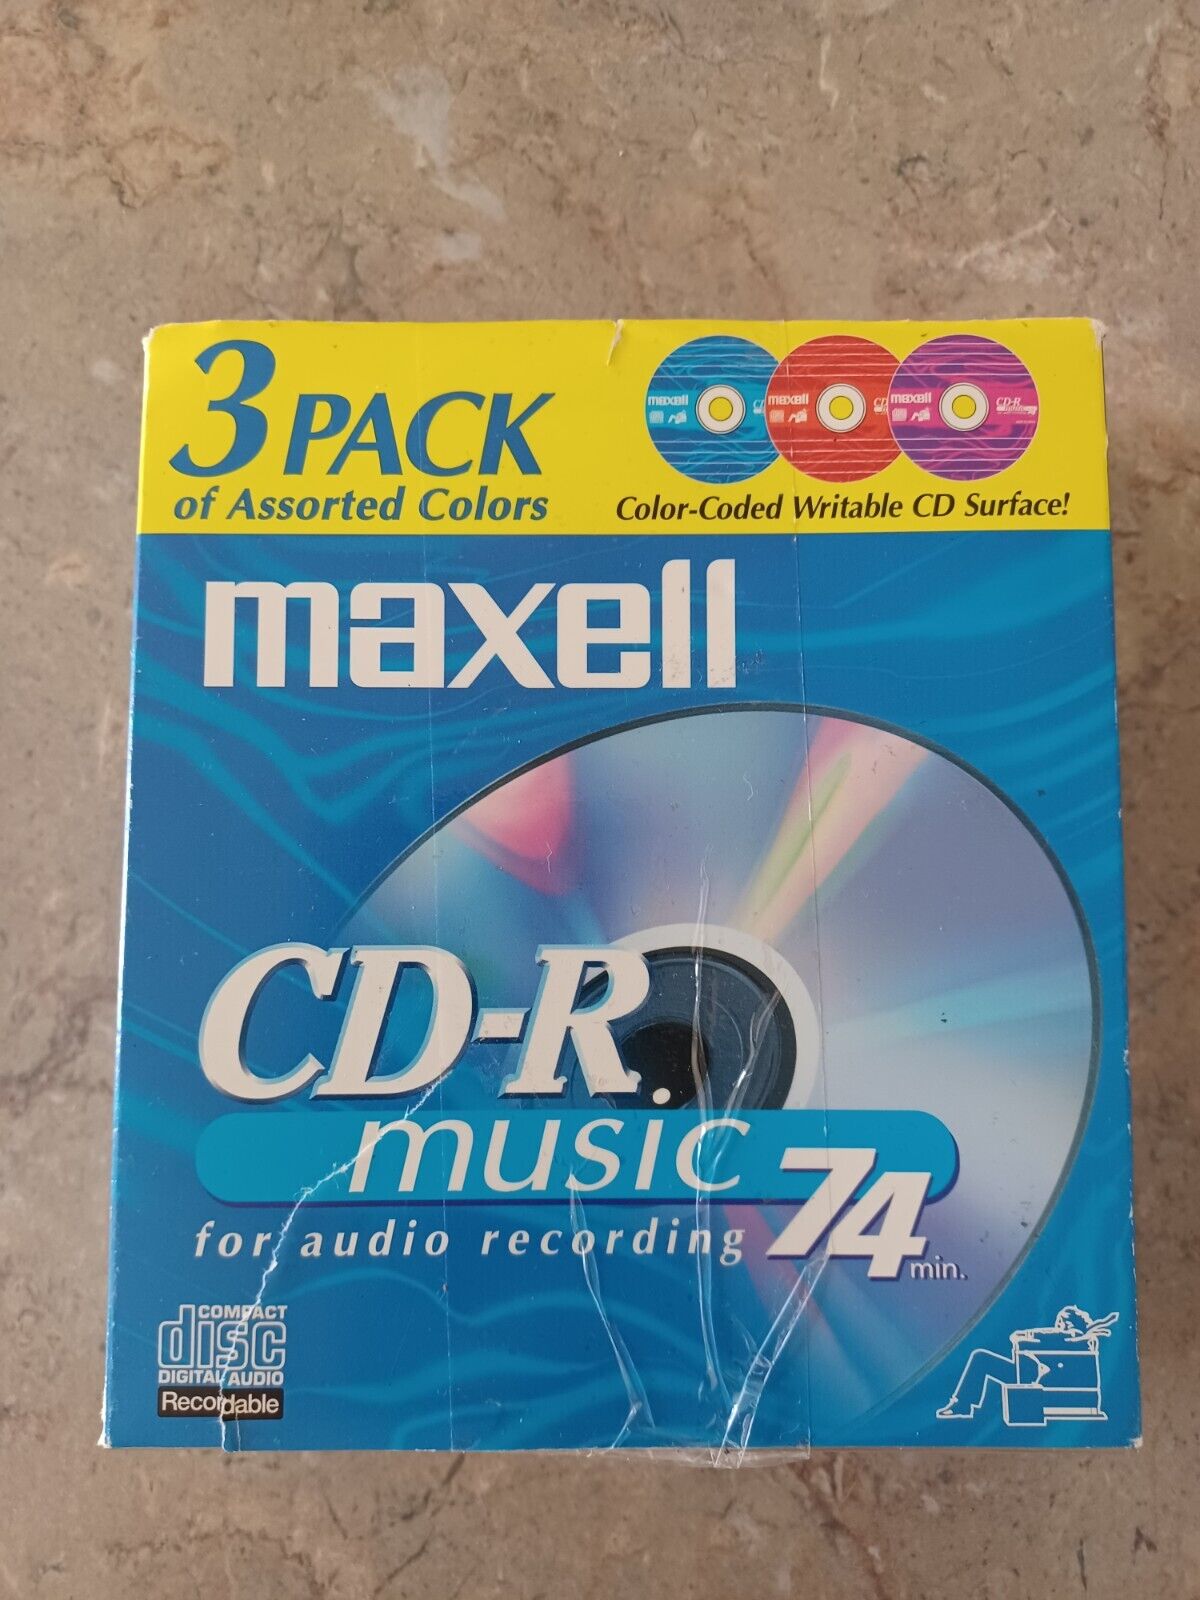 Maxell CD-R Music 74 3-Pack Audio Recording 74 Minutes 3 Color -NOS